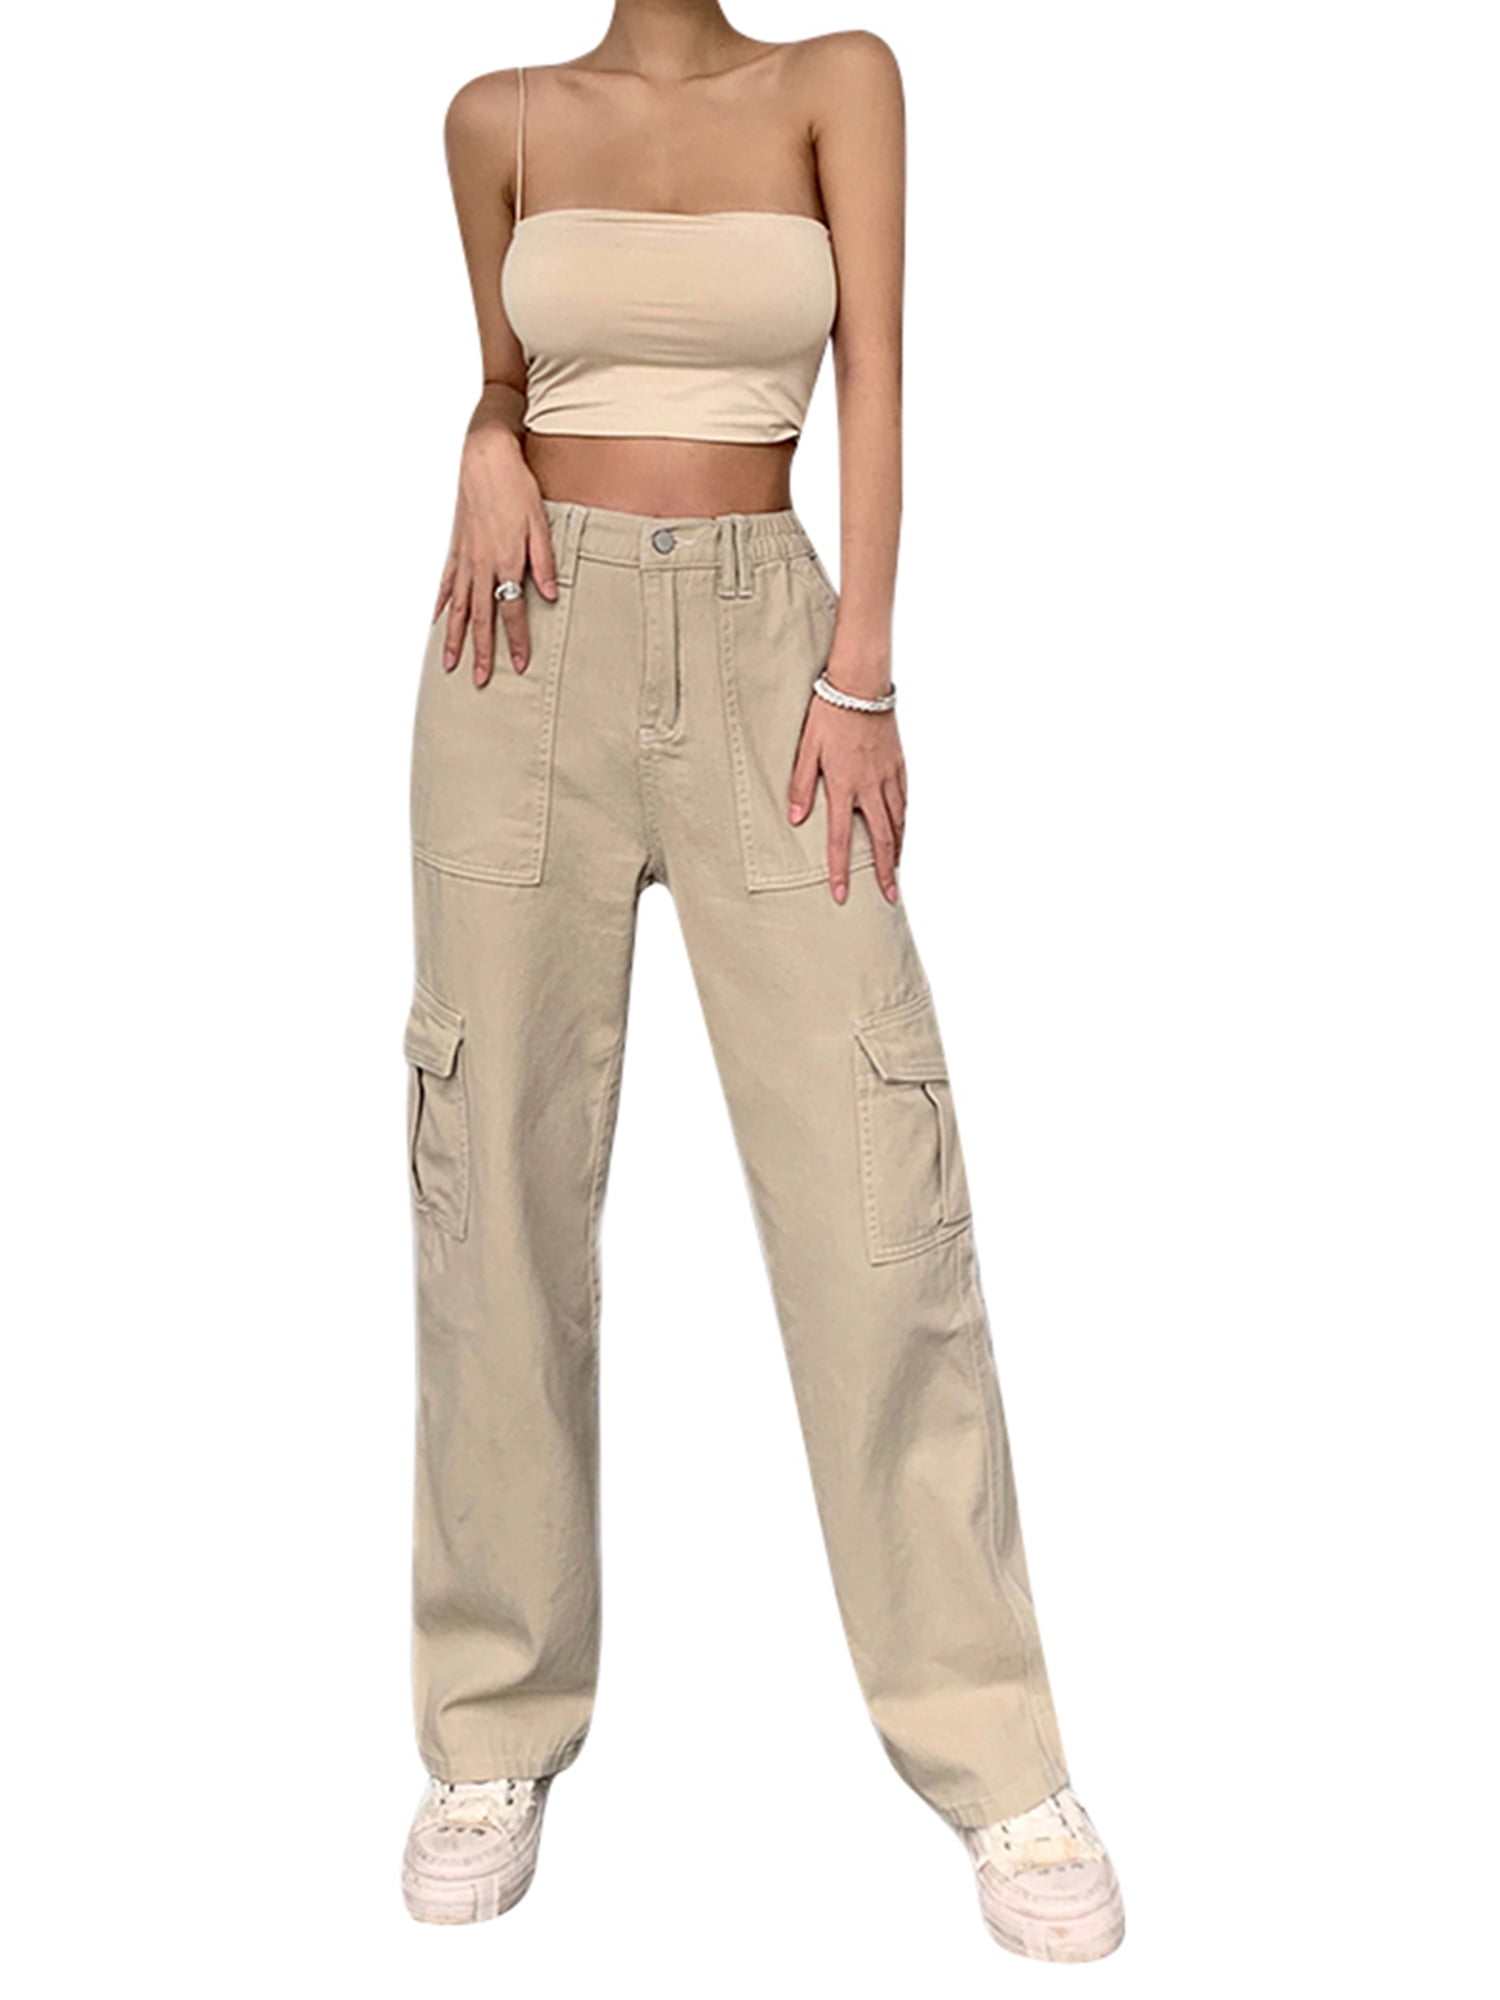 Diconna Women's Solid Color Cargo Pants High Waist Straight-leg Buckle  Jeans with Pockets Female Trousers Outfits Streetwear Khaki M